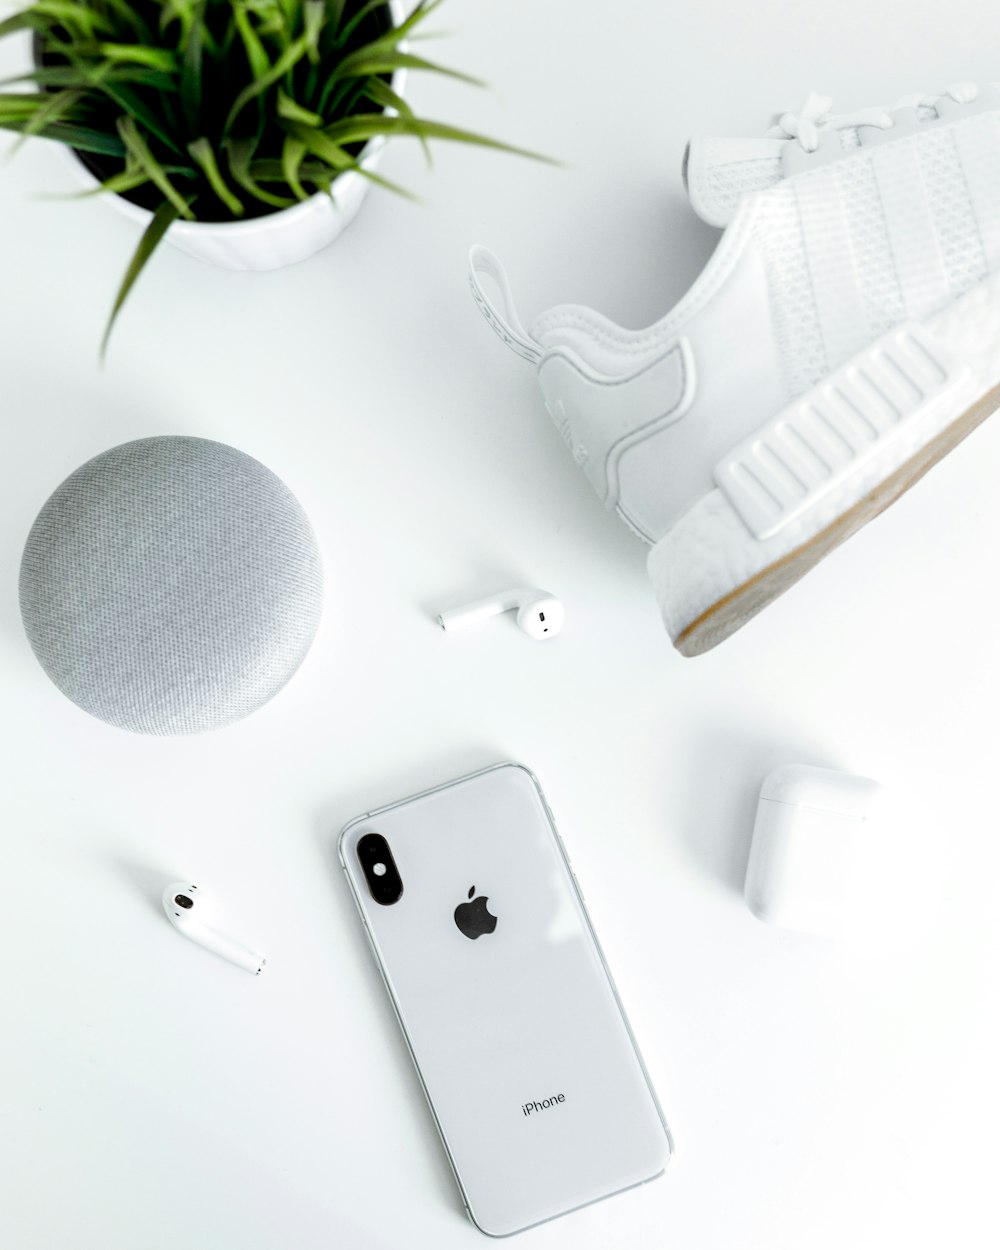 silver iPhone X near white adidas NMD shoe, AirPods with case, and chalk  Google Home Mini photo – Free Grey Image on Unsplash